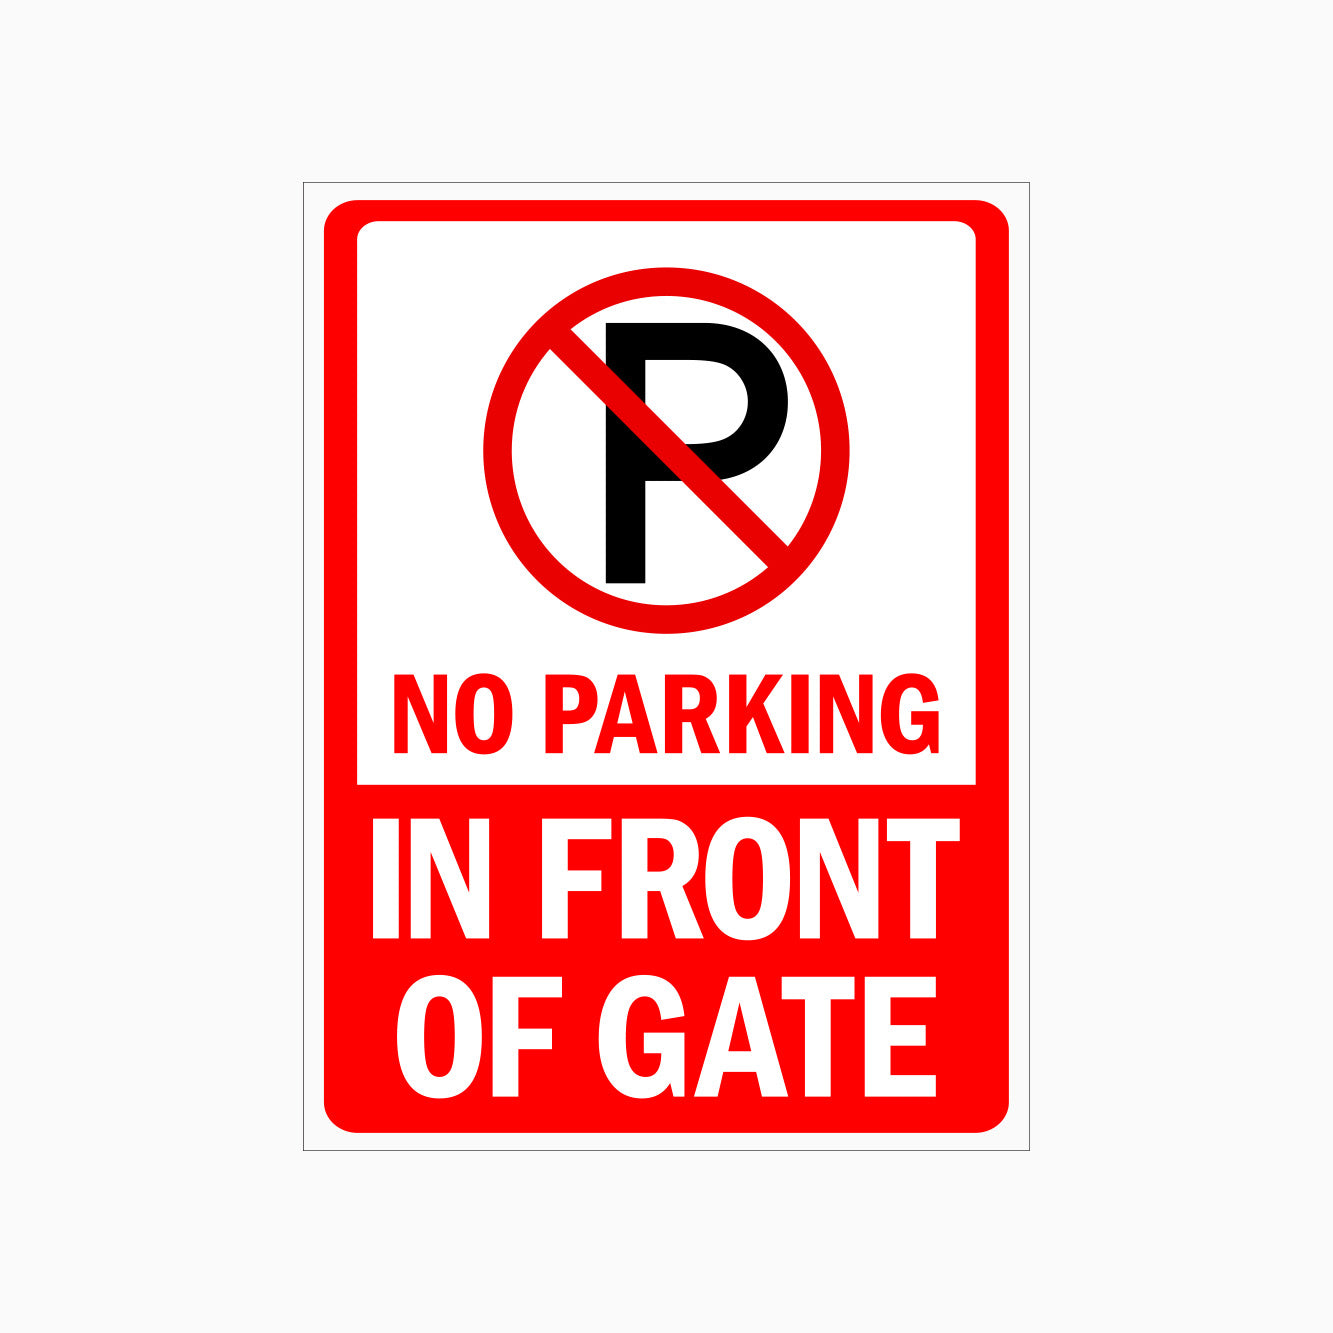 NO PARKING IN FRONT OF GATE SIGN - PARKING SIGNS - GET SIGNS - SHOP ONLINE